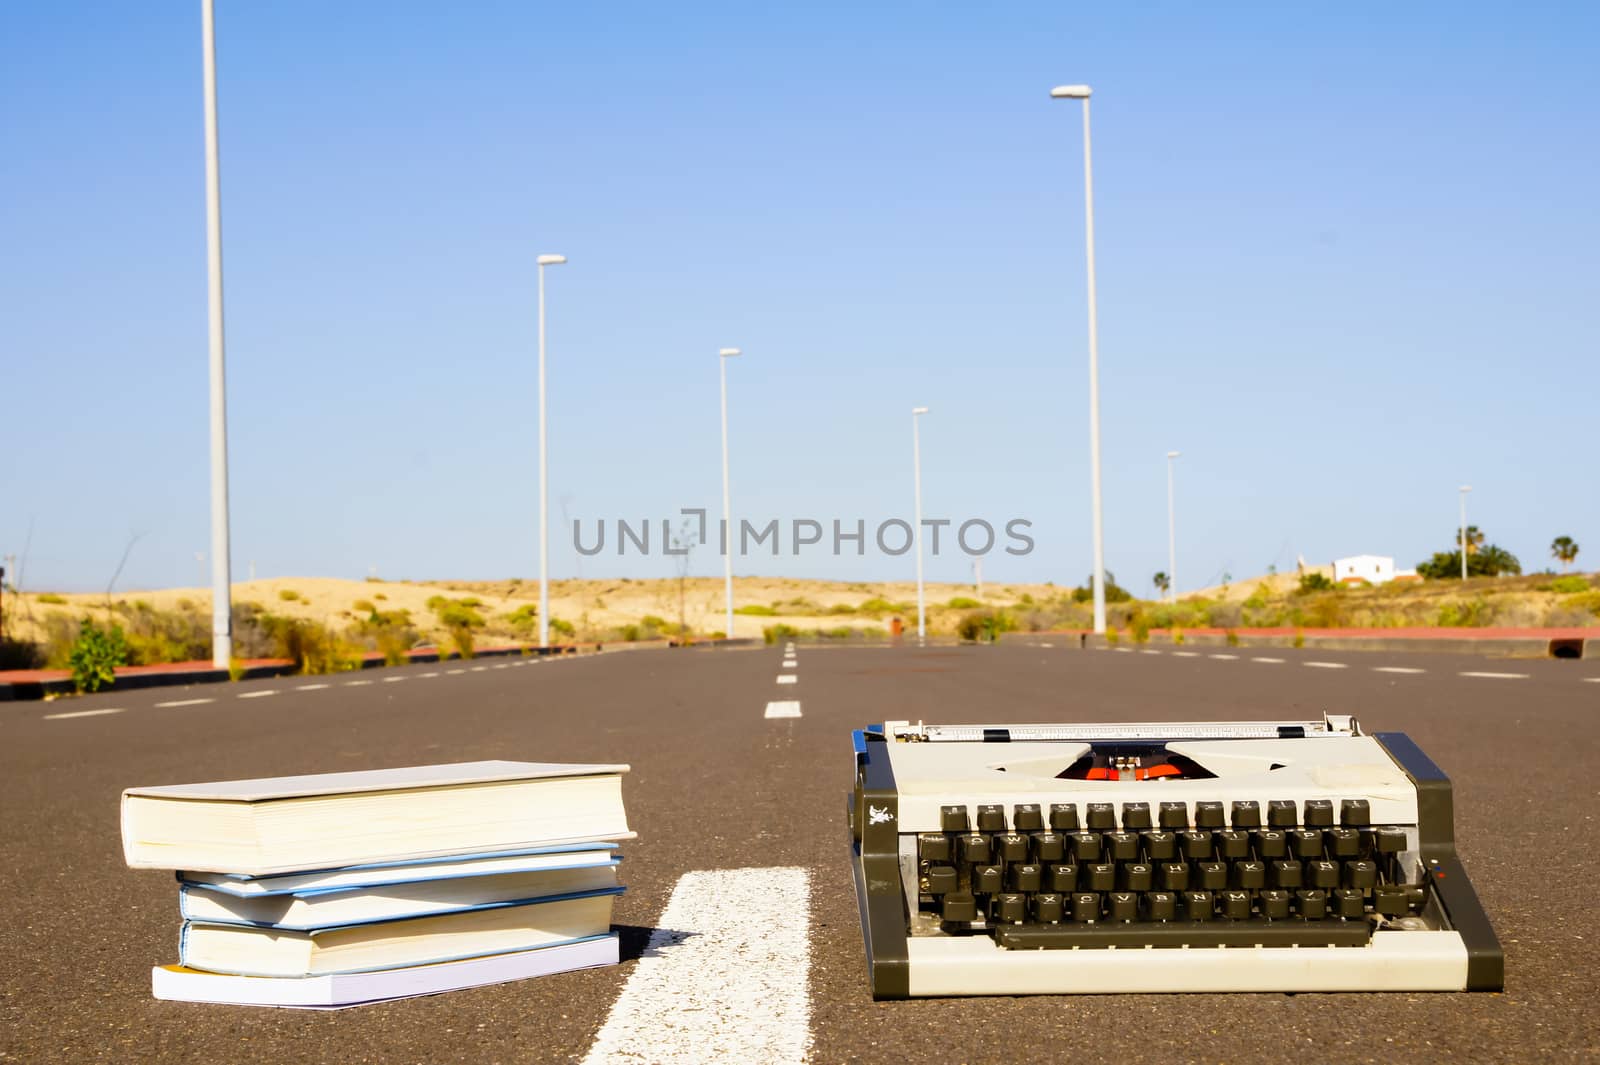 On the Road Writing Concept by underworld